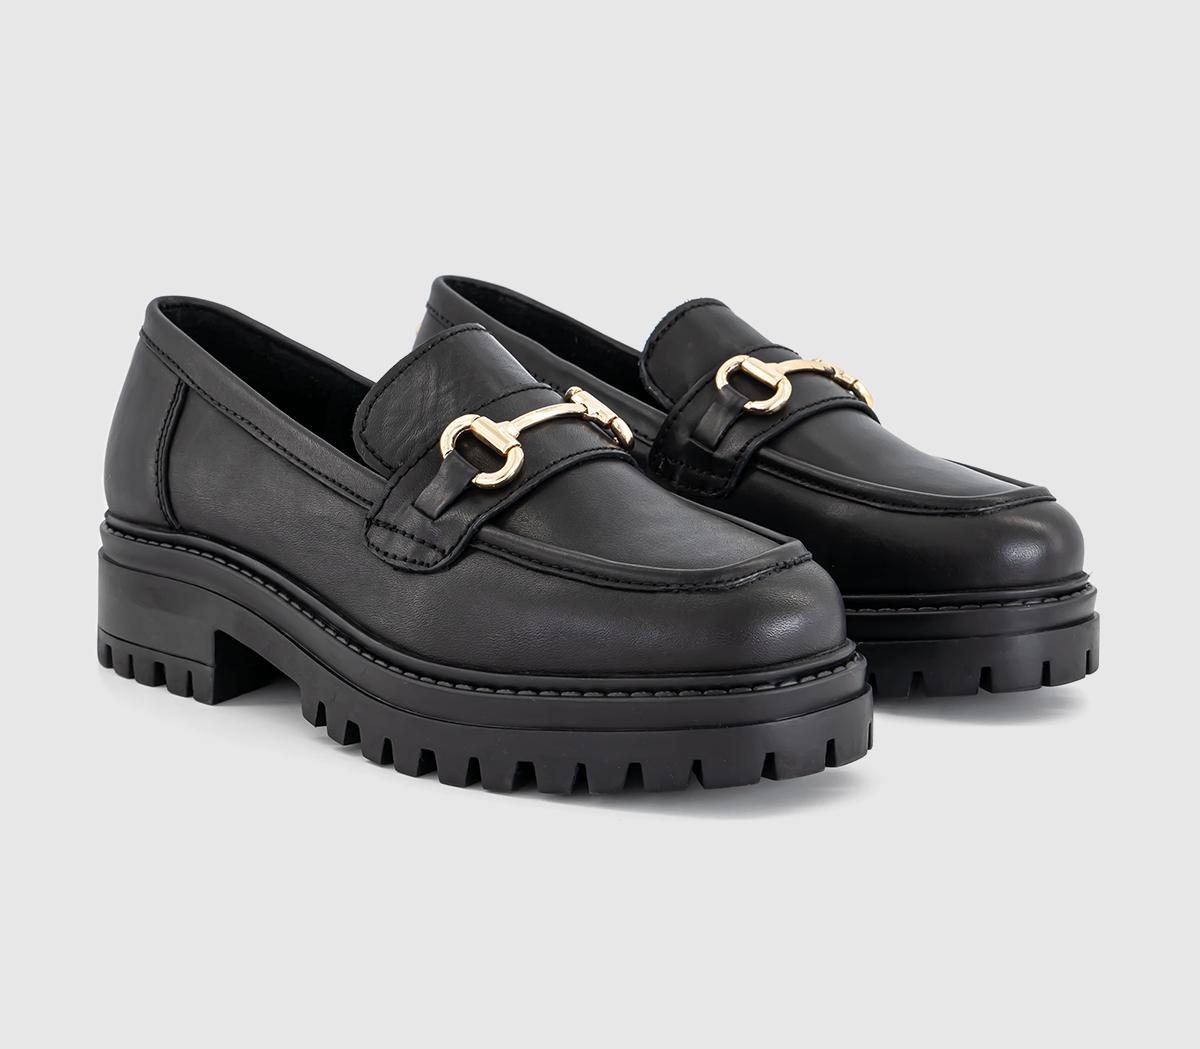 OFFICE Womens Fairhope Chunky Snaffle Trim Loafers Black Leather, 9